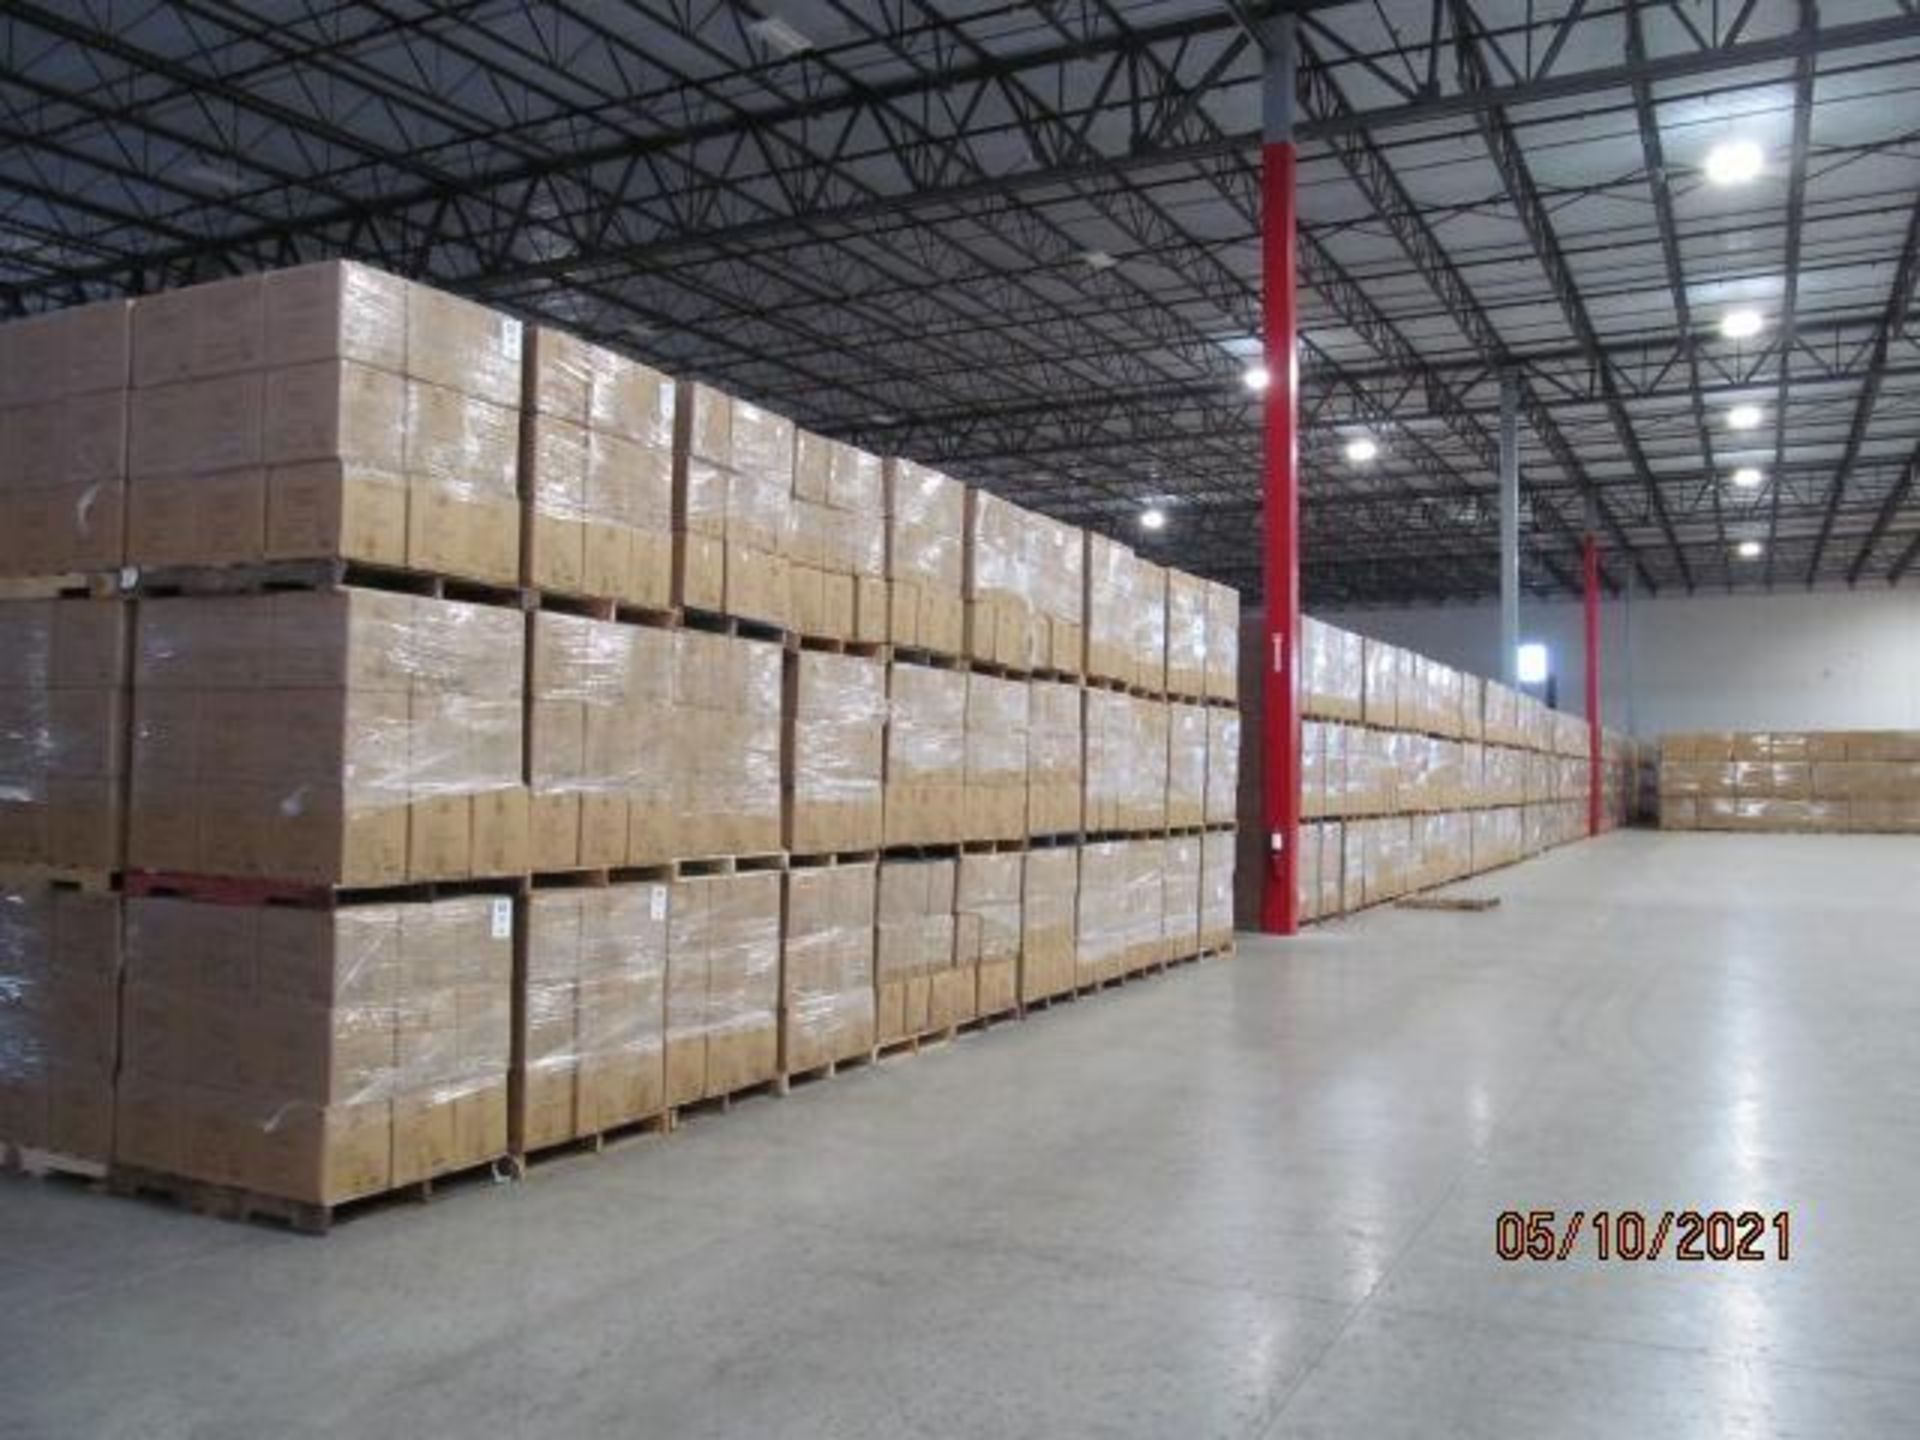 Lot of Waxman Kleen Freak Sanitizing Wipes consisting of 33,696 packages on 52 pallets. Each package - Image 8 of 11